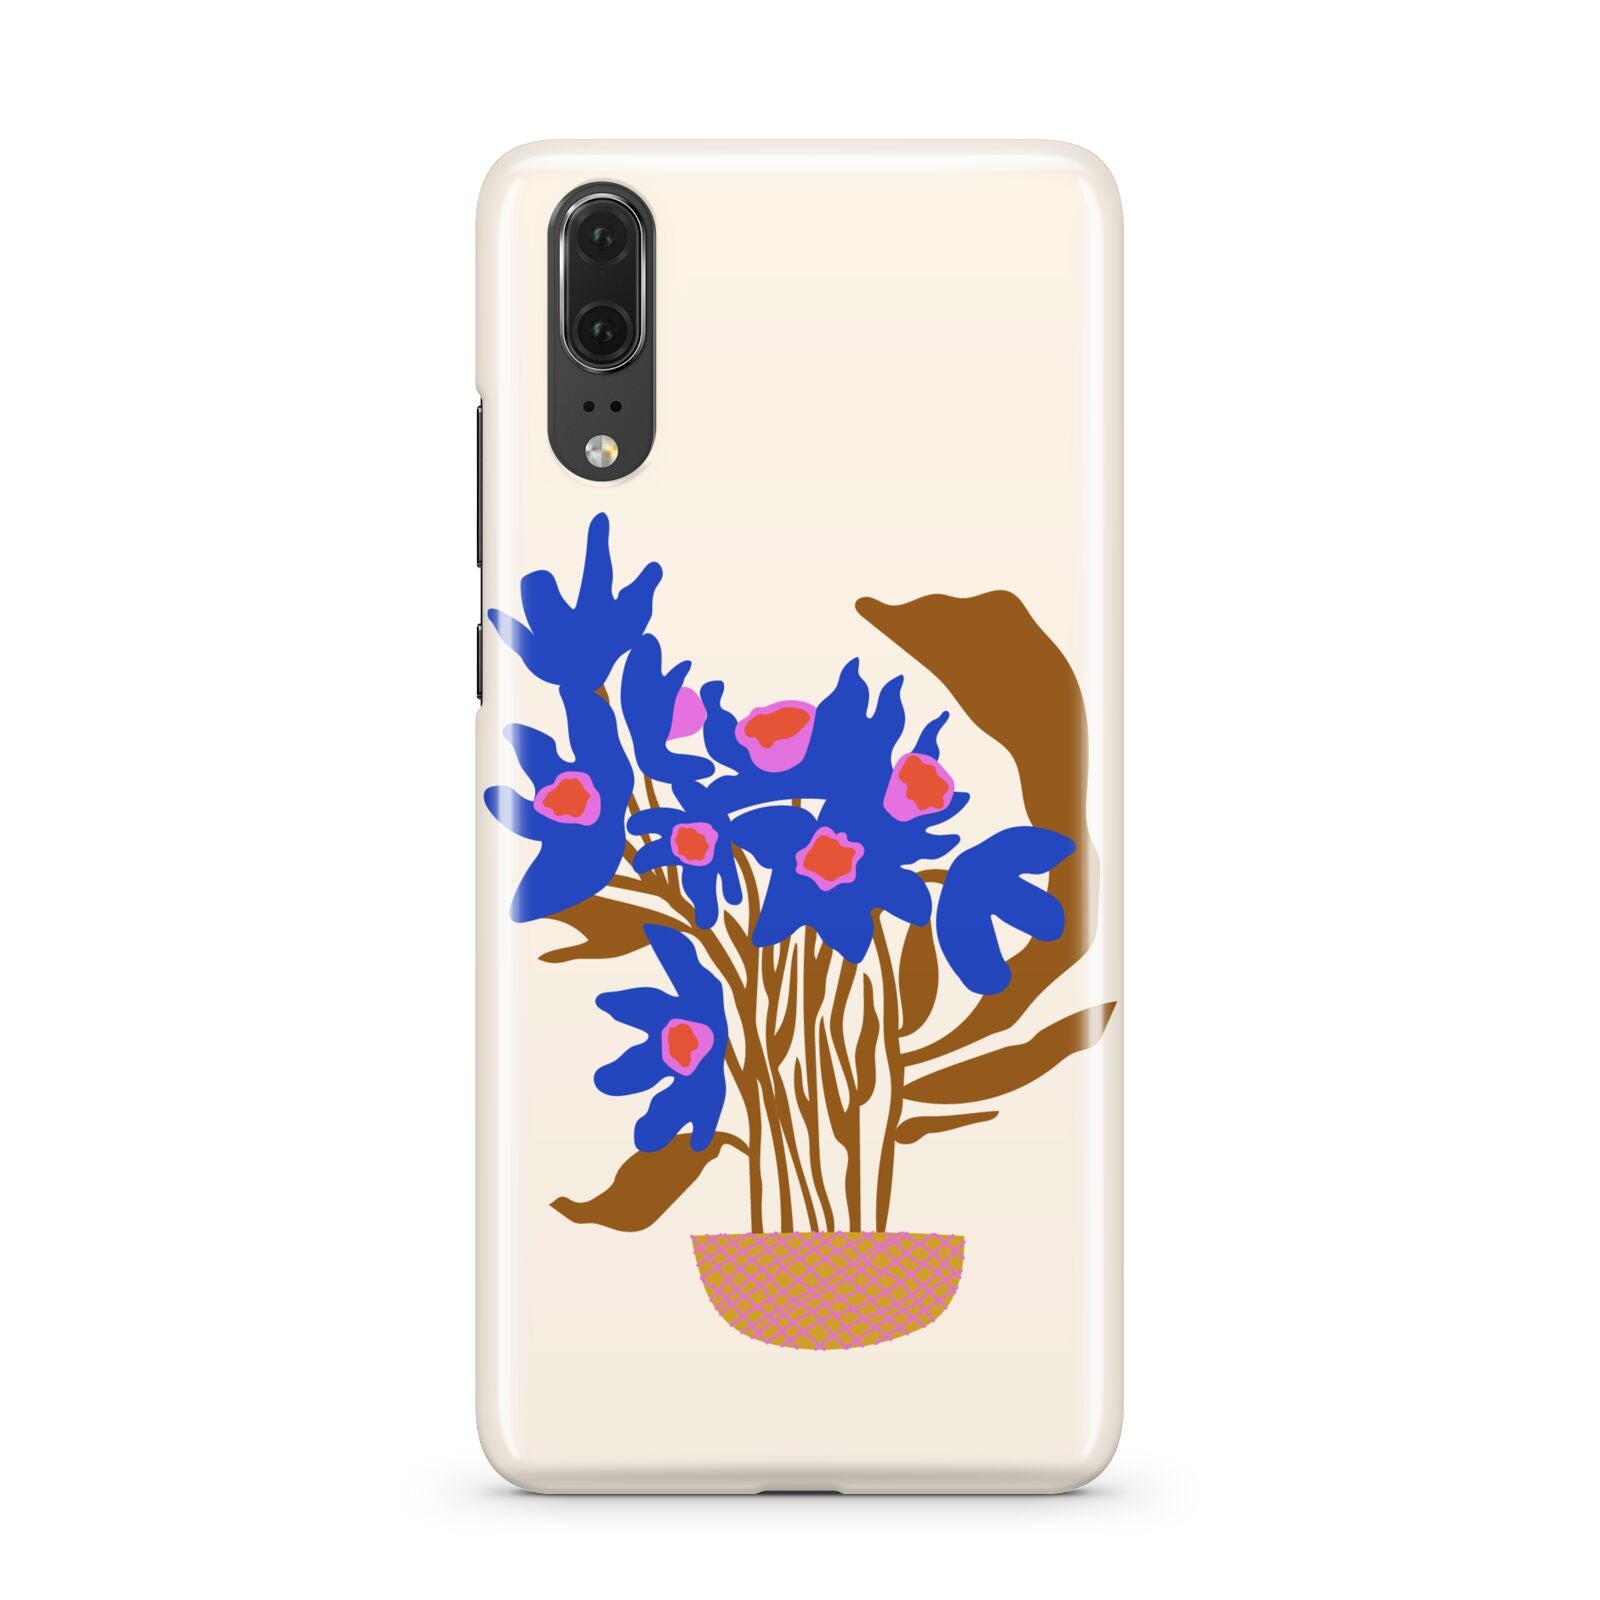 Flowers in a Vase Huawei P20 Phone Case